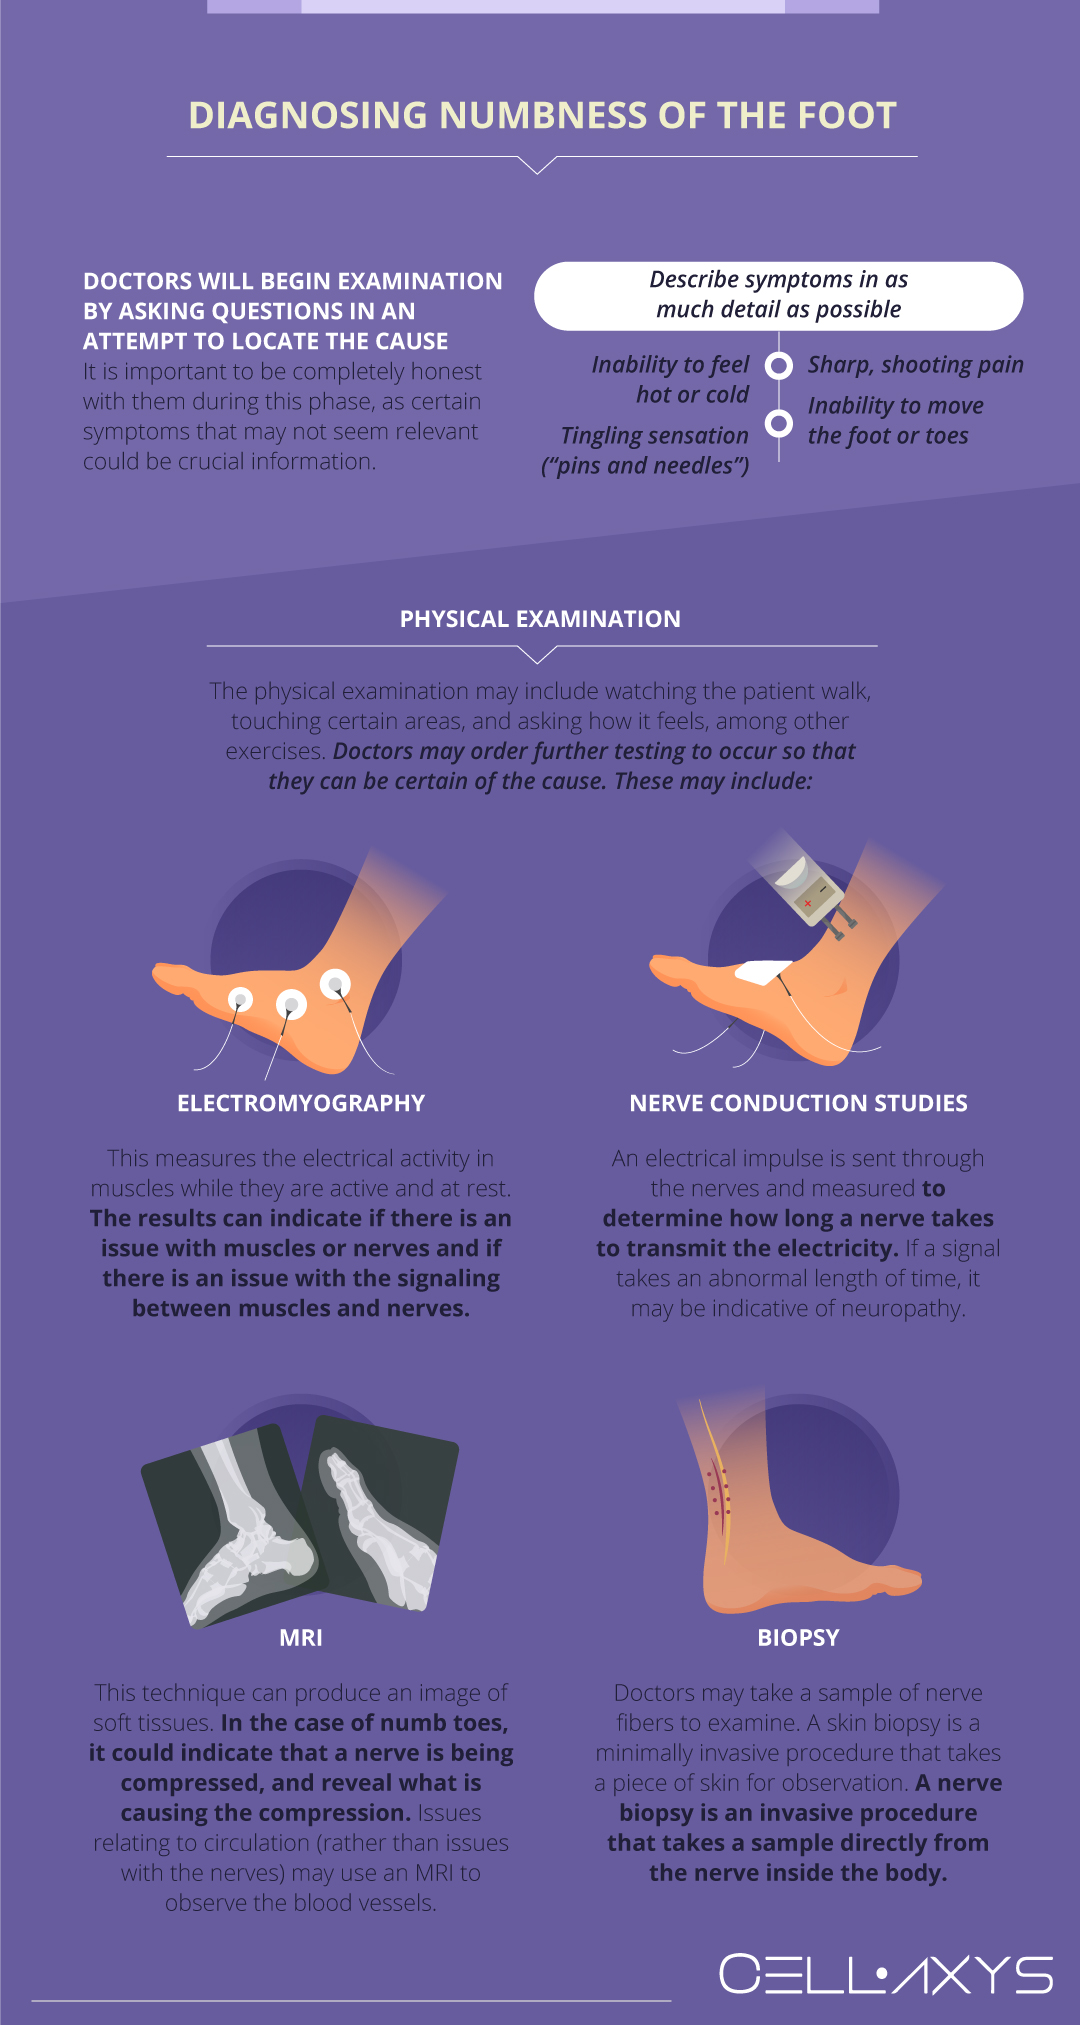 Diagnosing Numbness of the Foot